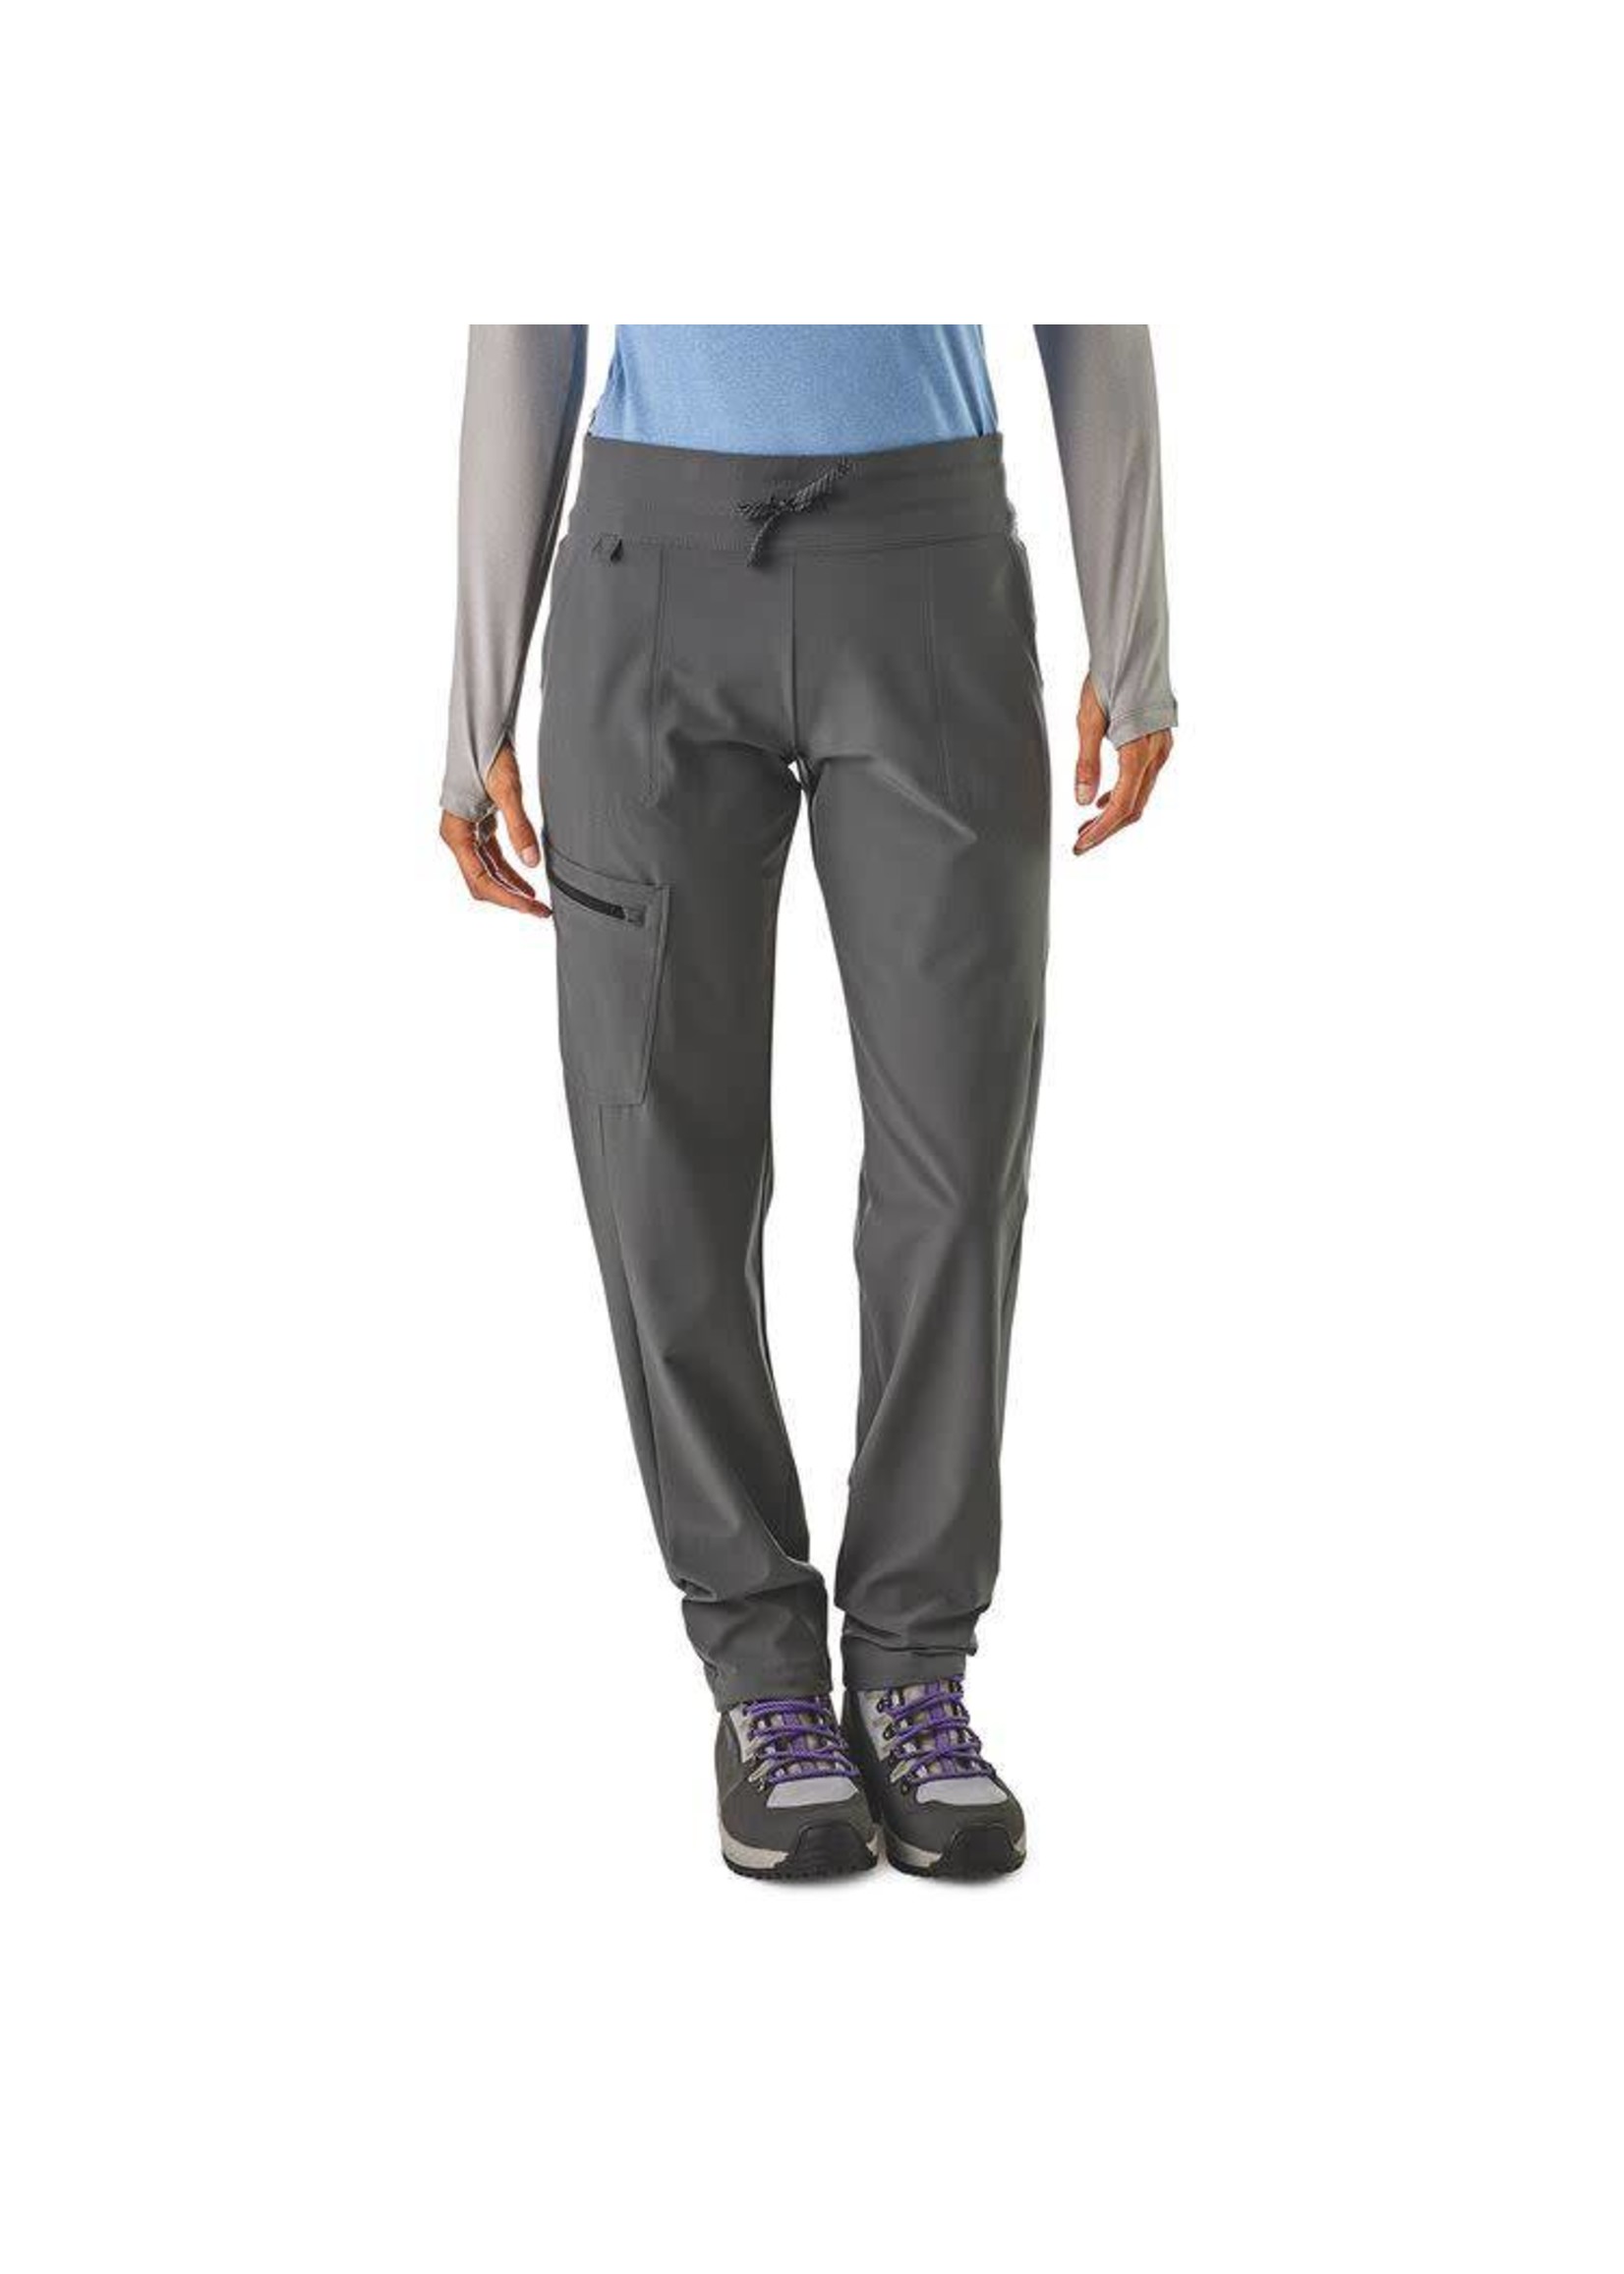 Patagonia Women's Fall River Comfort Stretch Pants - Sweetwater Fly Shop